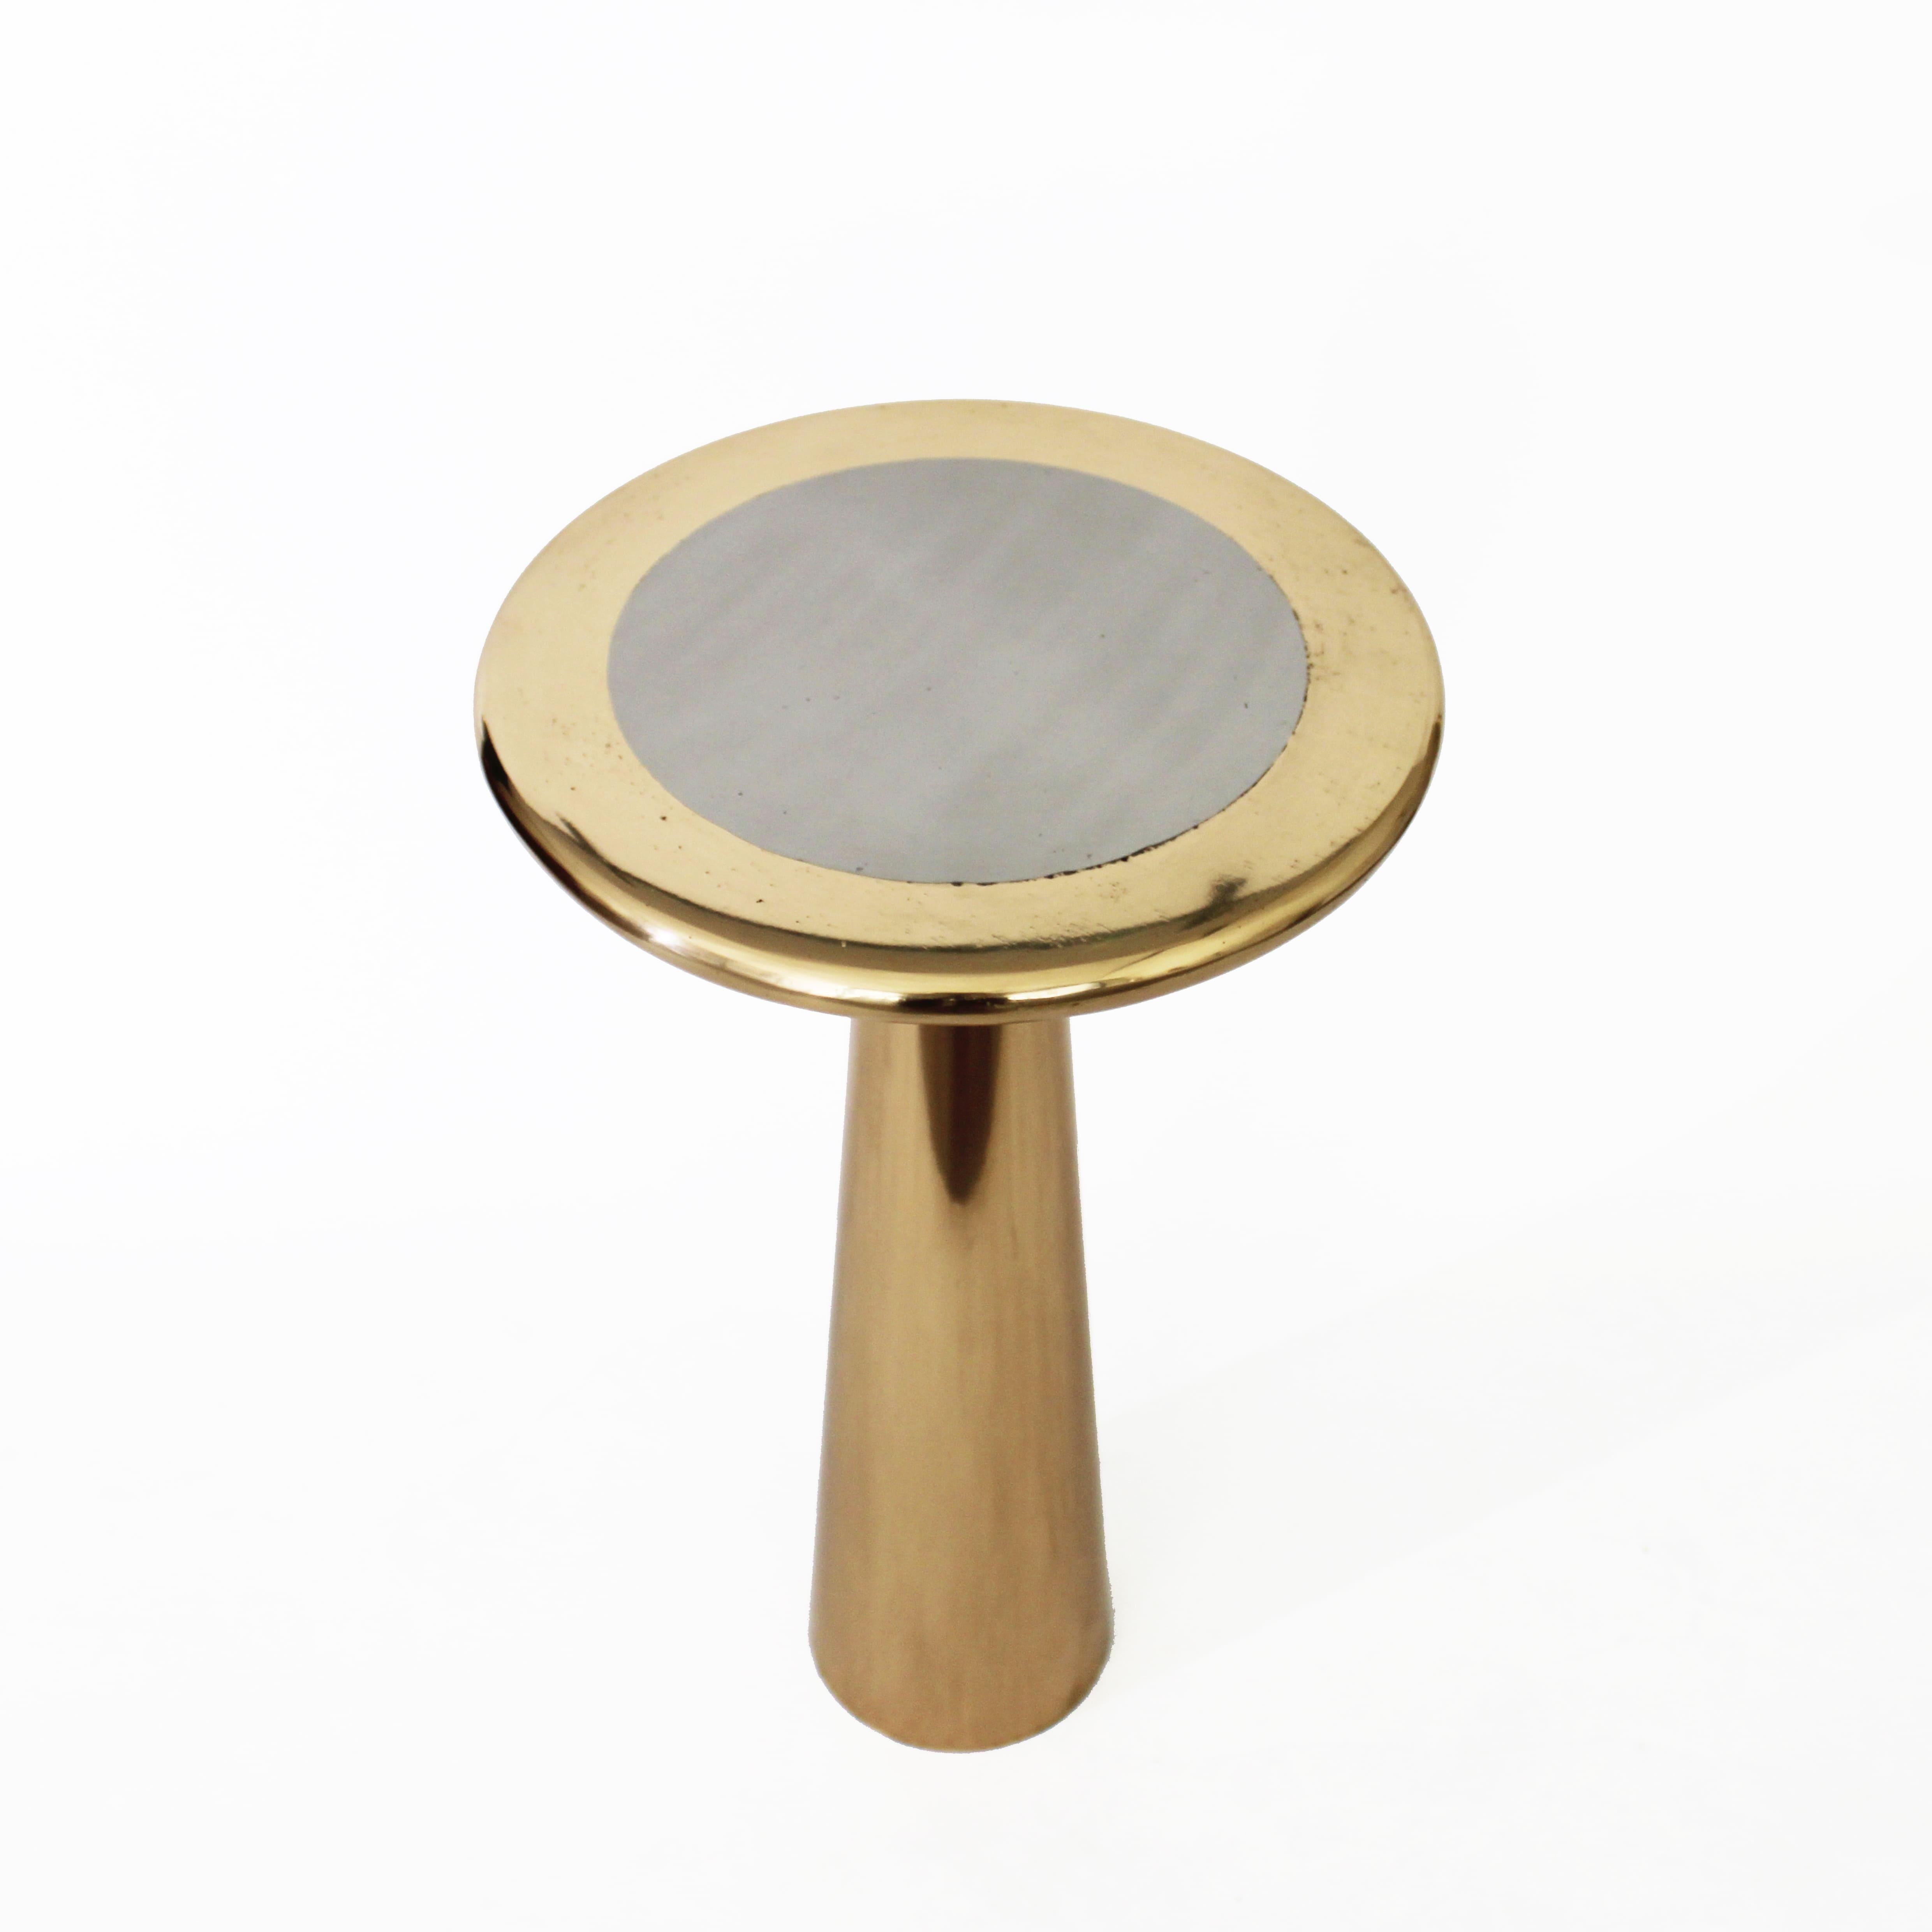 Cast Bronze and Stainless Steel Lega Side Table by Studio Sunt 1